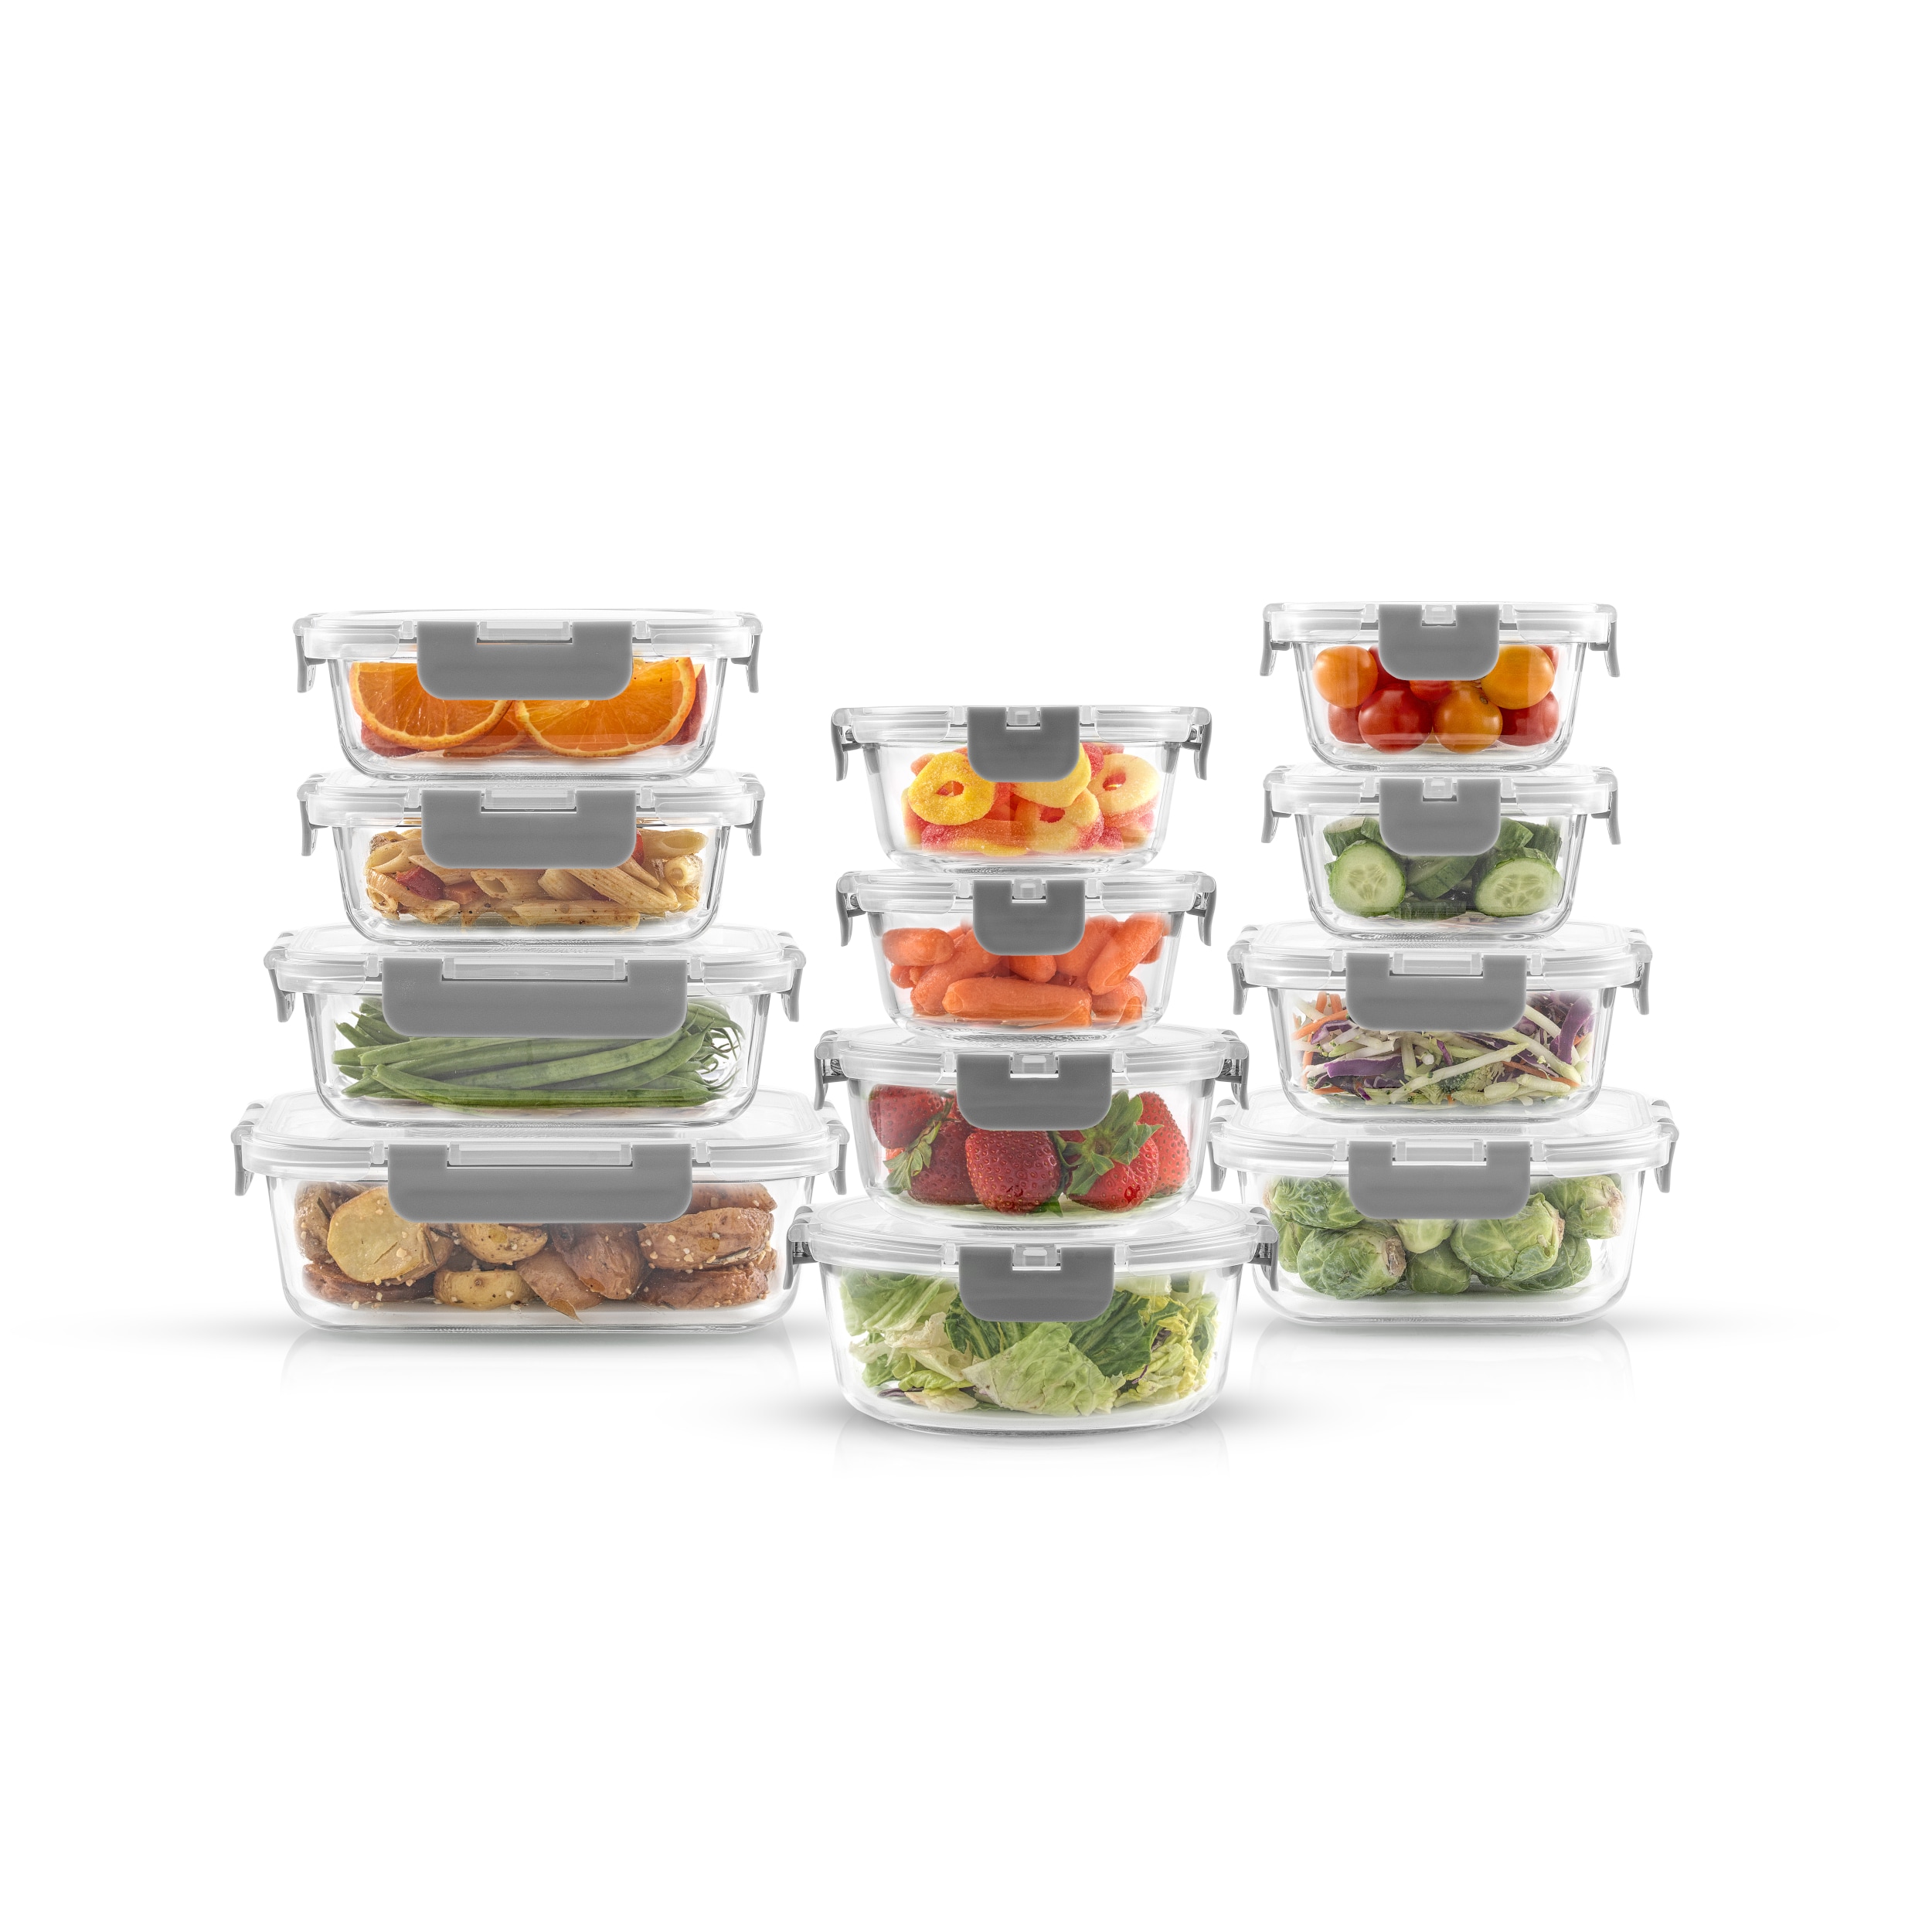 Glasslock 14 Piece Oven, Freezer, and Microwave Safe Stackable Glass Food  Storage & Bakeware Container Set w/ Latching Lids for Storage and Meal Prep